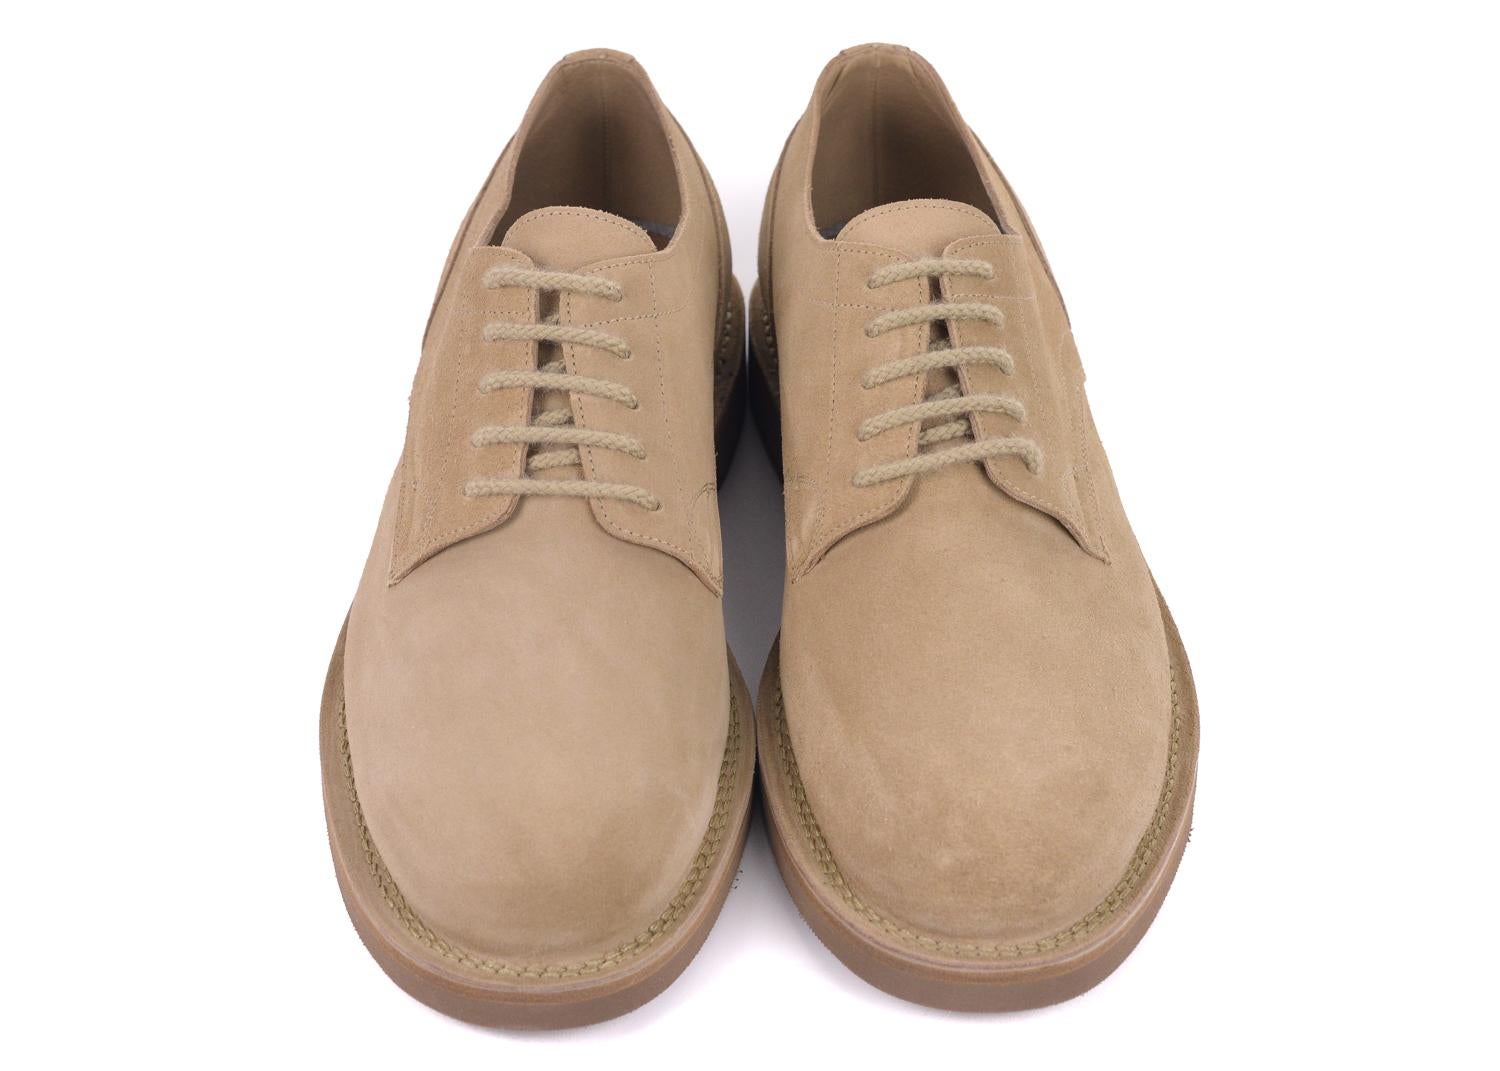 Brunello Cucinelli's Light Brown Desert Boots will be the perfect go to's for the day. This boots features smooth light brown suede, tonal fabric lacing, and tonal colored rubber sole . This low boot can be paired with a pair of light denim and a